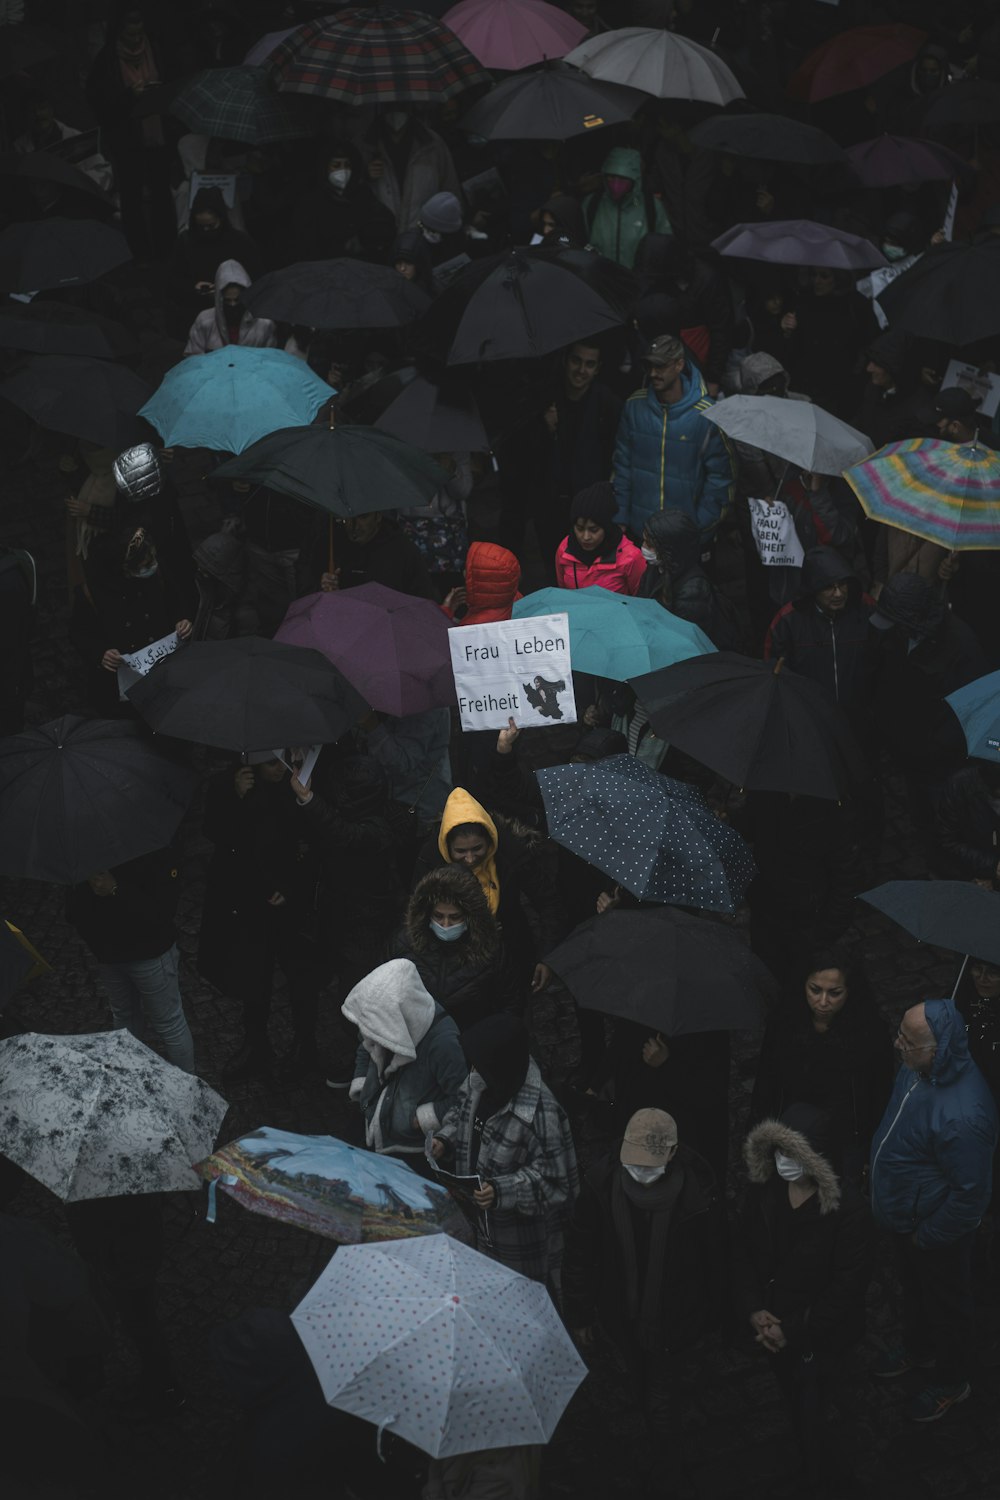 a crowd of people holding umbrellas